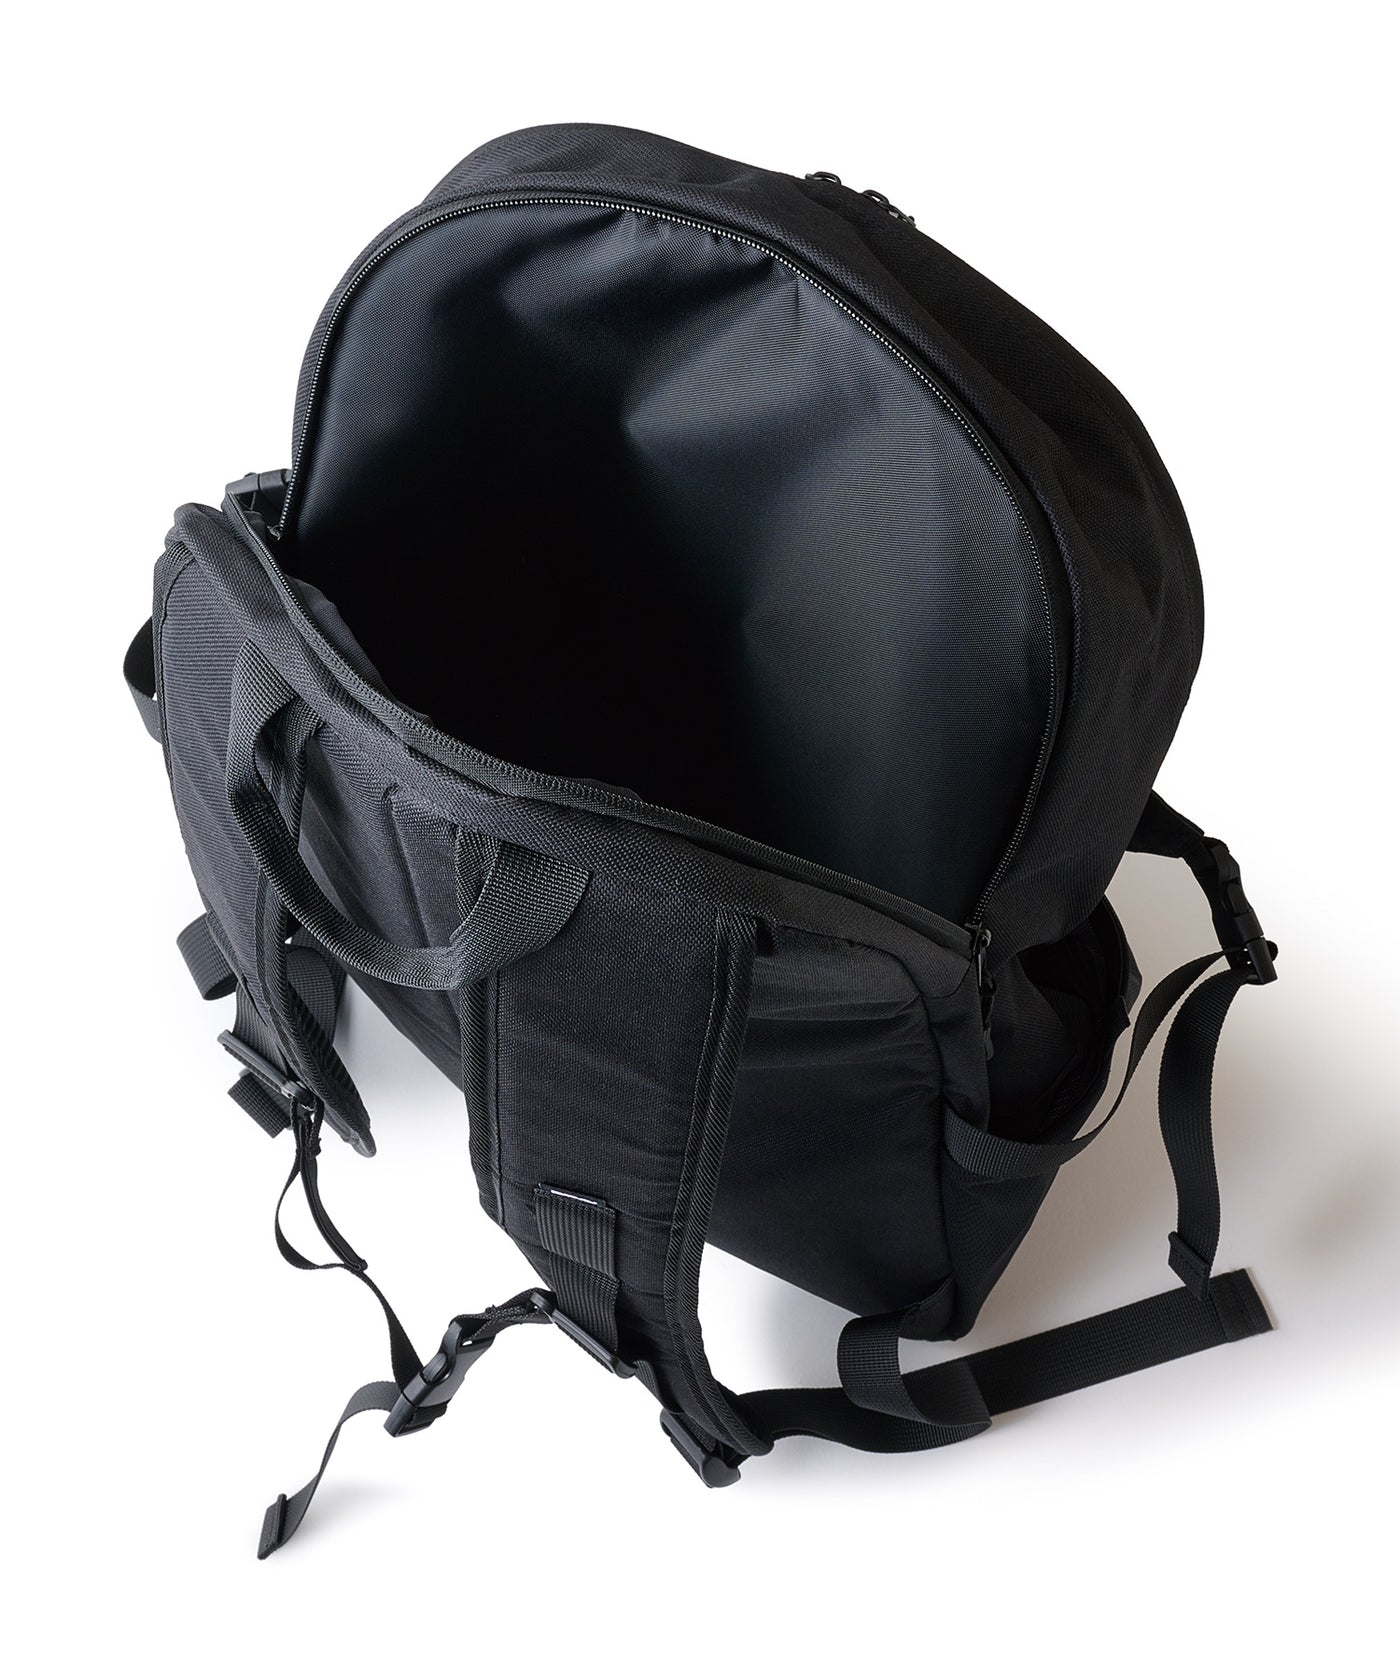 BACKPACK – FTC